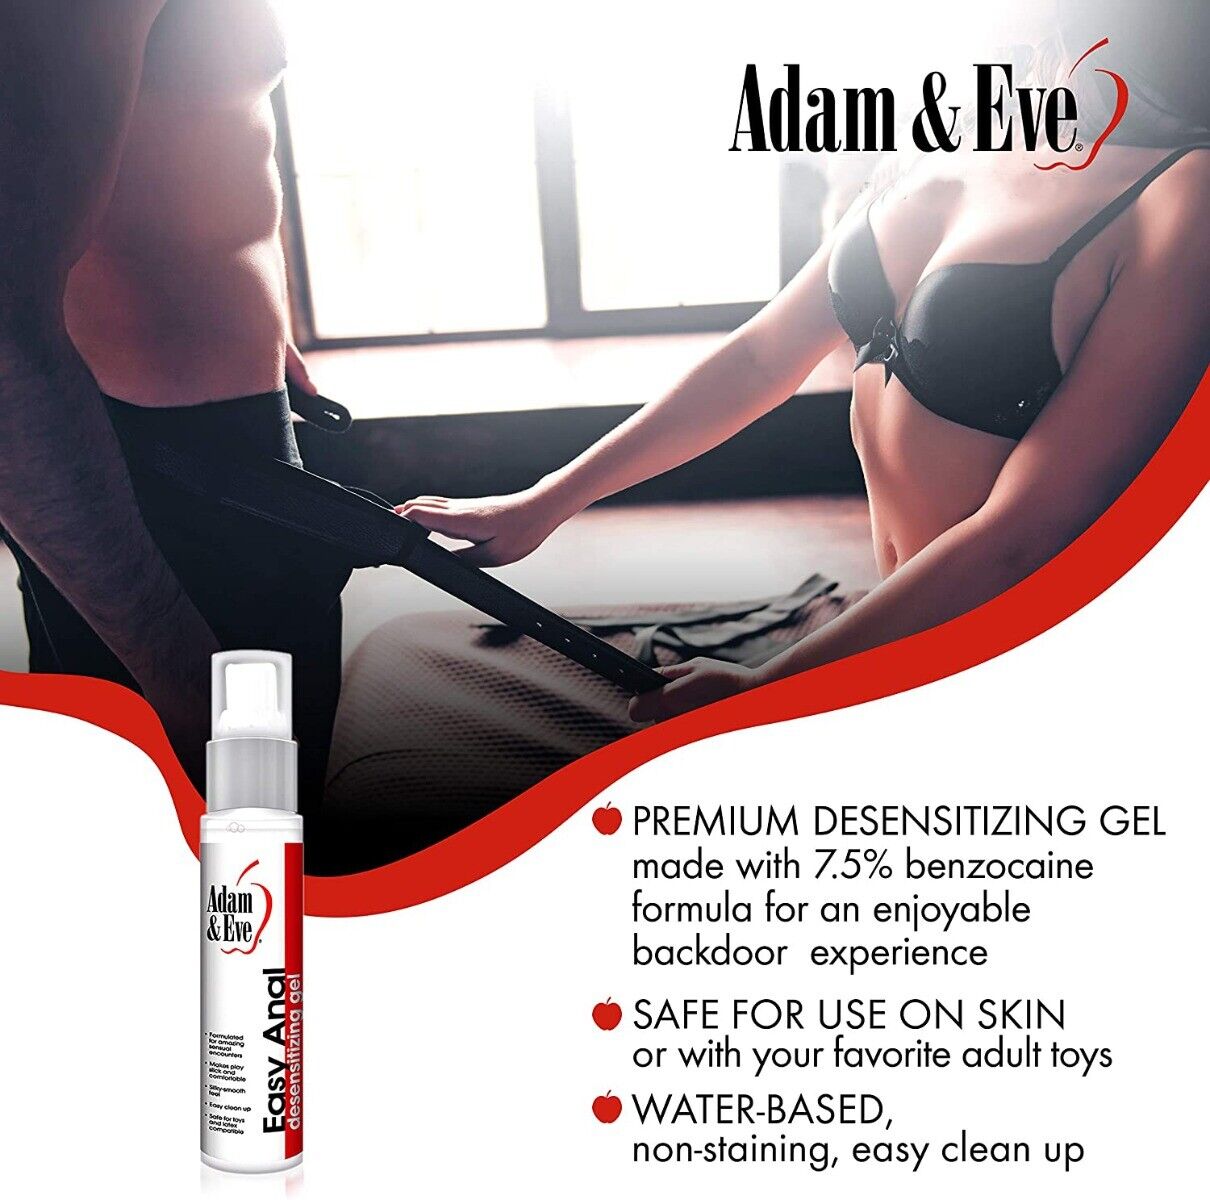 Adam and Eve Easy Anal Desensitizer Desensitizing Anal Lubricant Lube